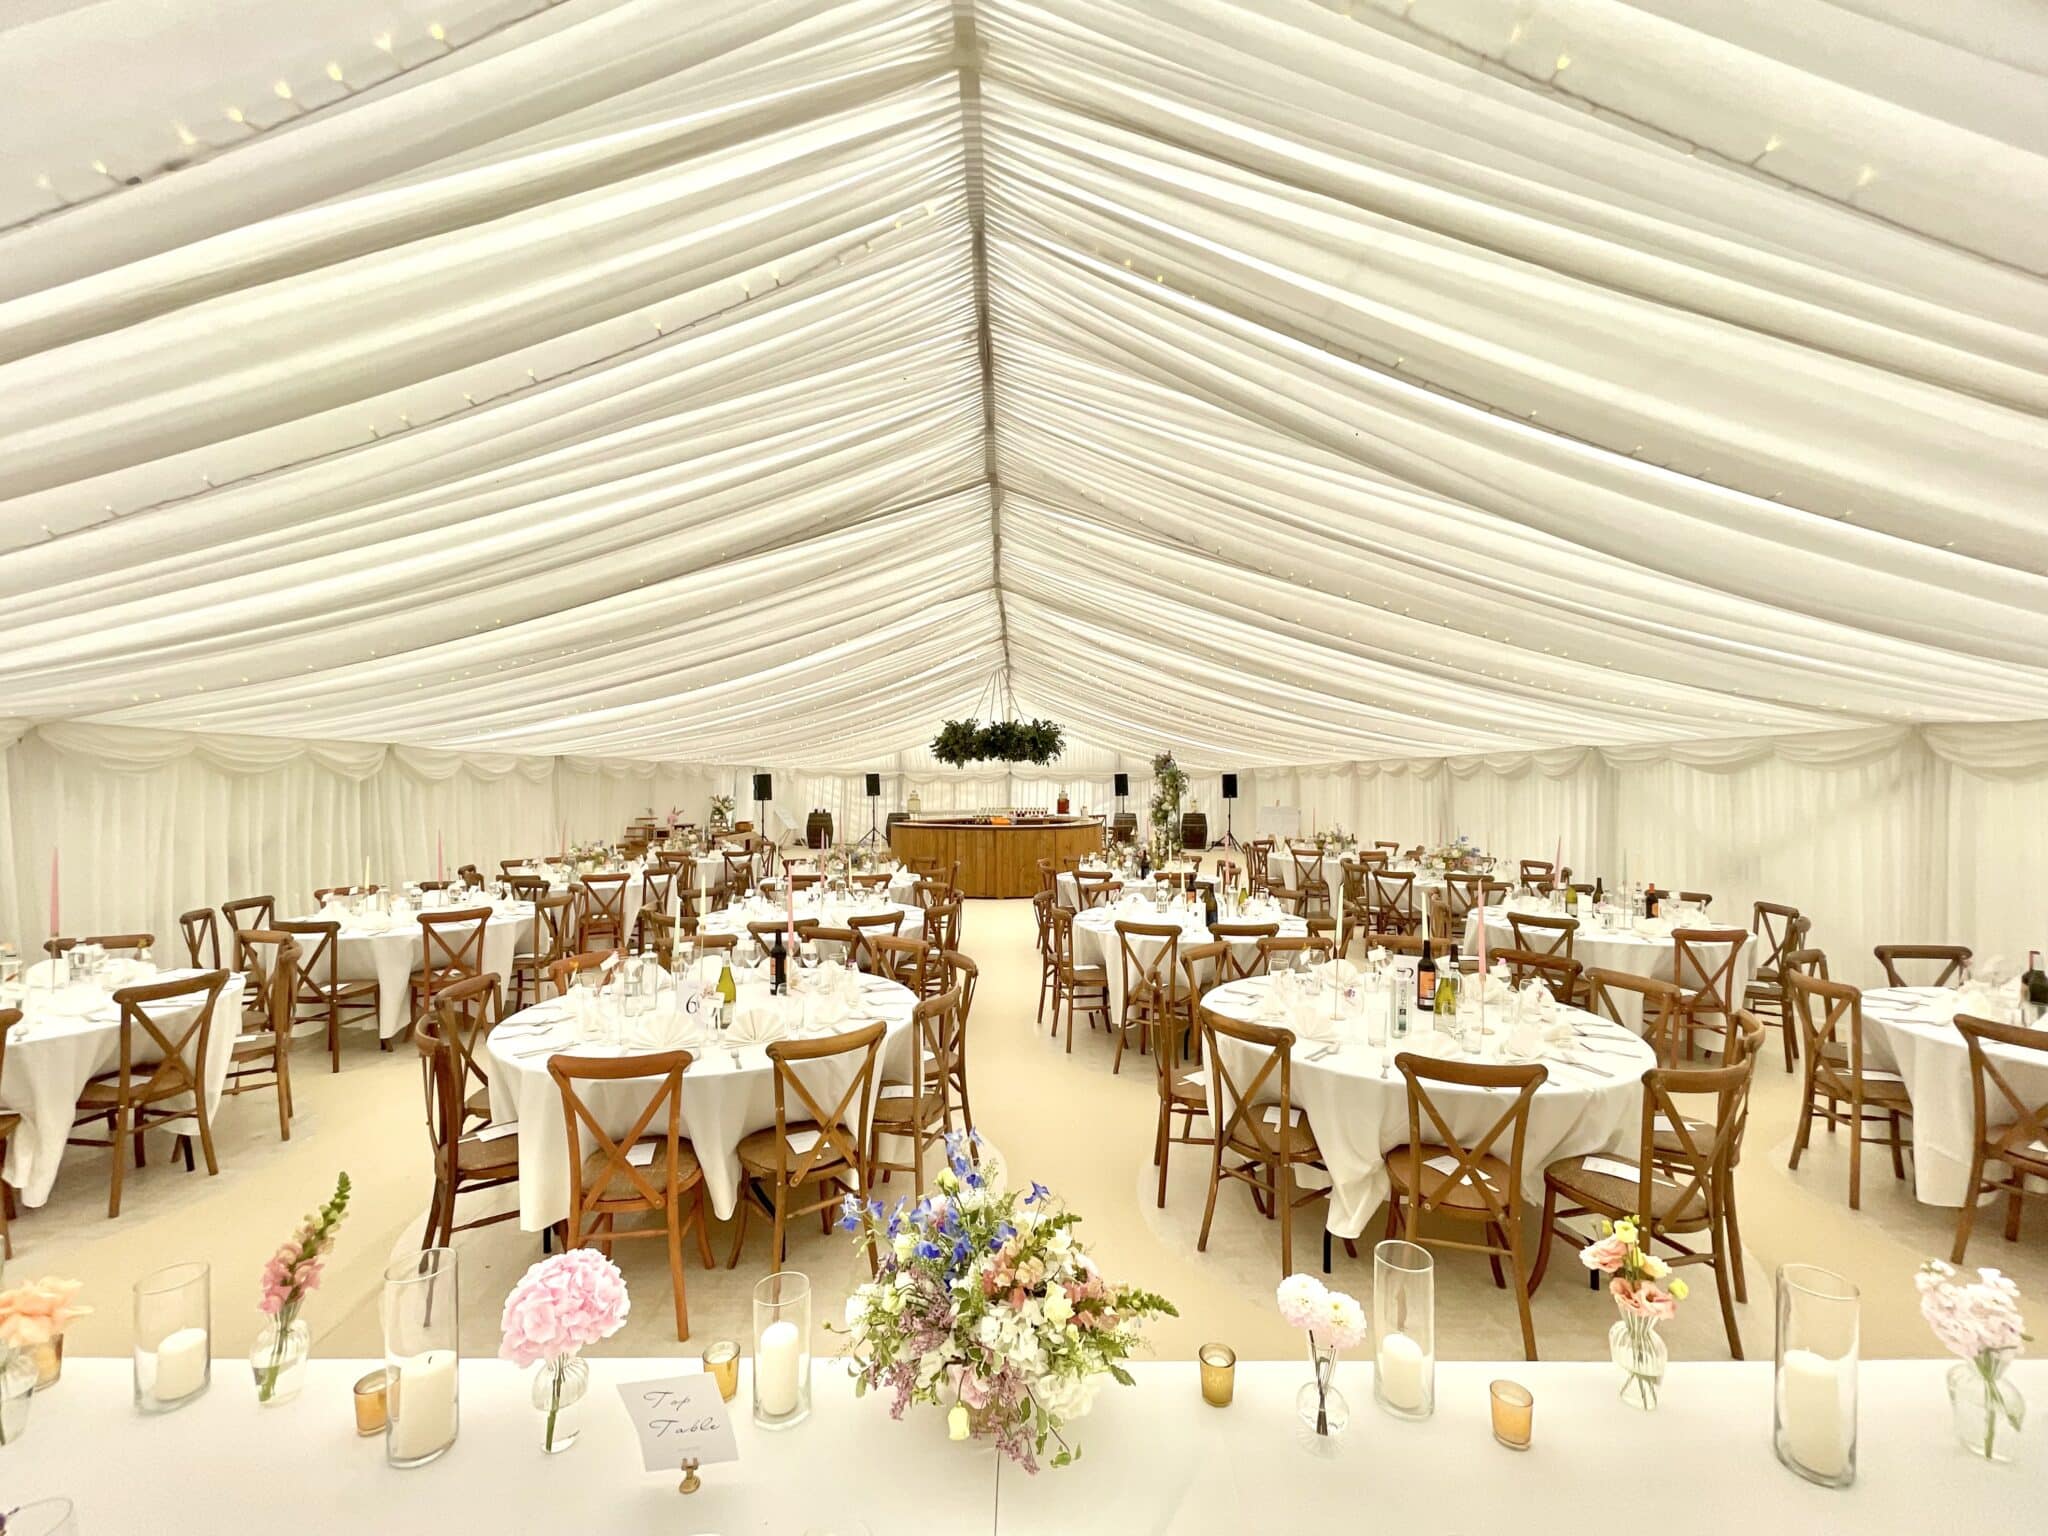 How Much is a Marquee Wedding?